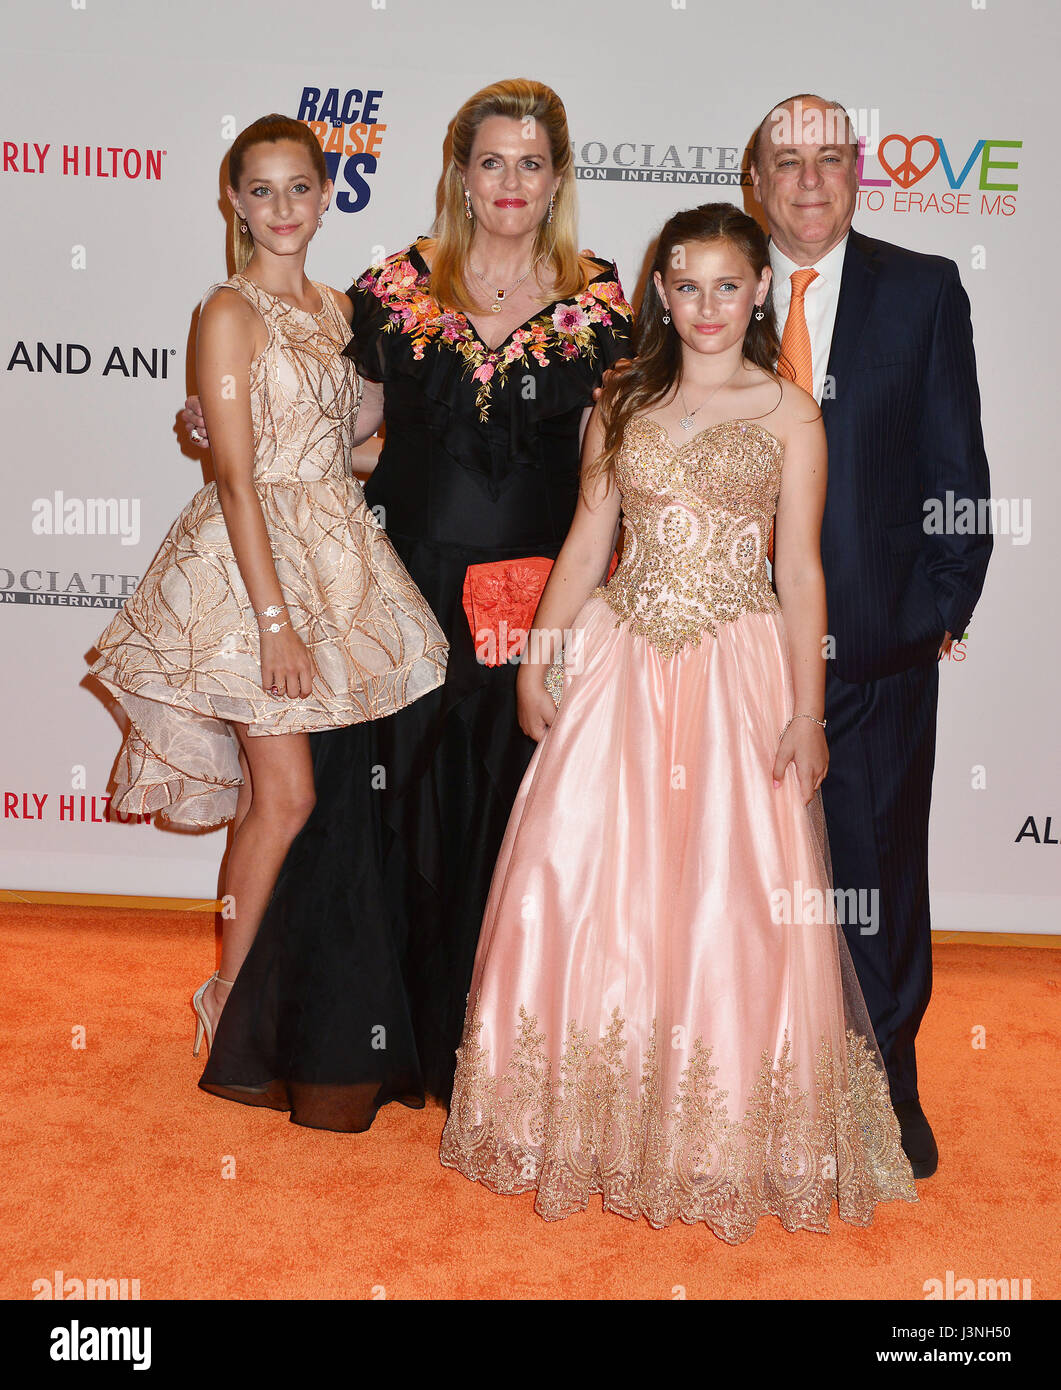 Los Angeles, USA. 5th May, 2017. Nancy Davis (top R) with husband Ken Rickel and daughters Isabella Rickel and Ariana Rickel at the Race to Erase MS 2017 at the Beverly Hilton Hotel in Los Angeles. May 6, 2017. Credit: Tsuni / USA/Alamy Live News Stock Photo